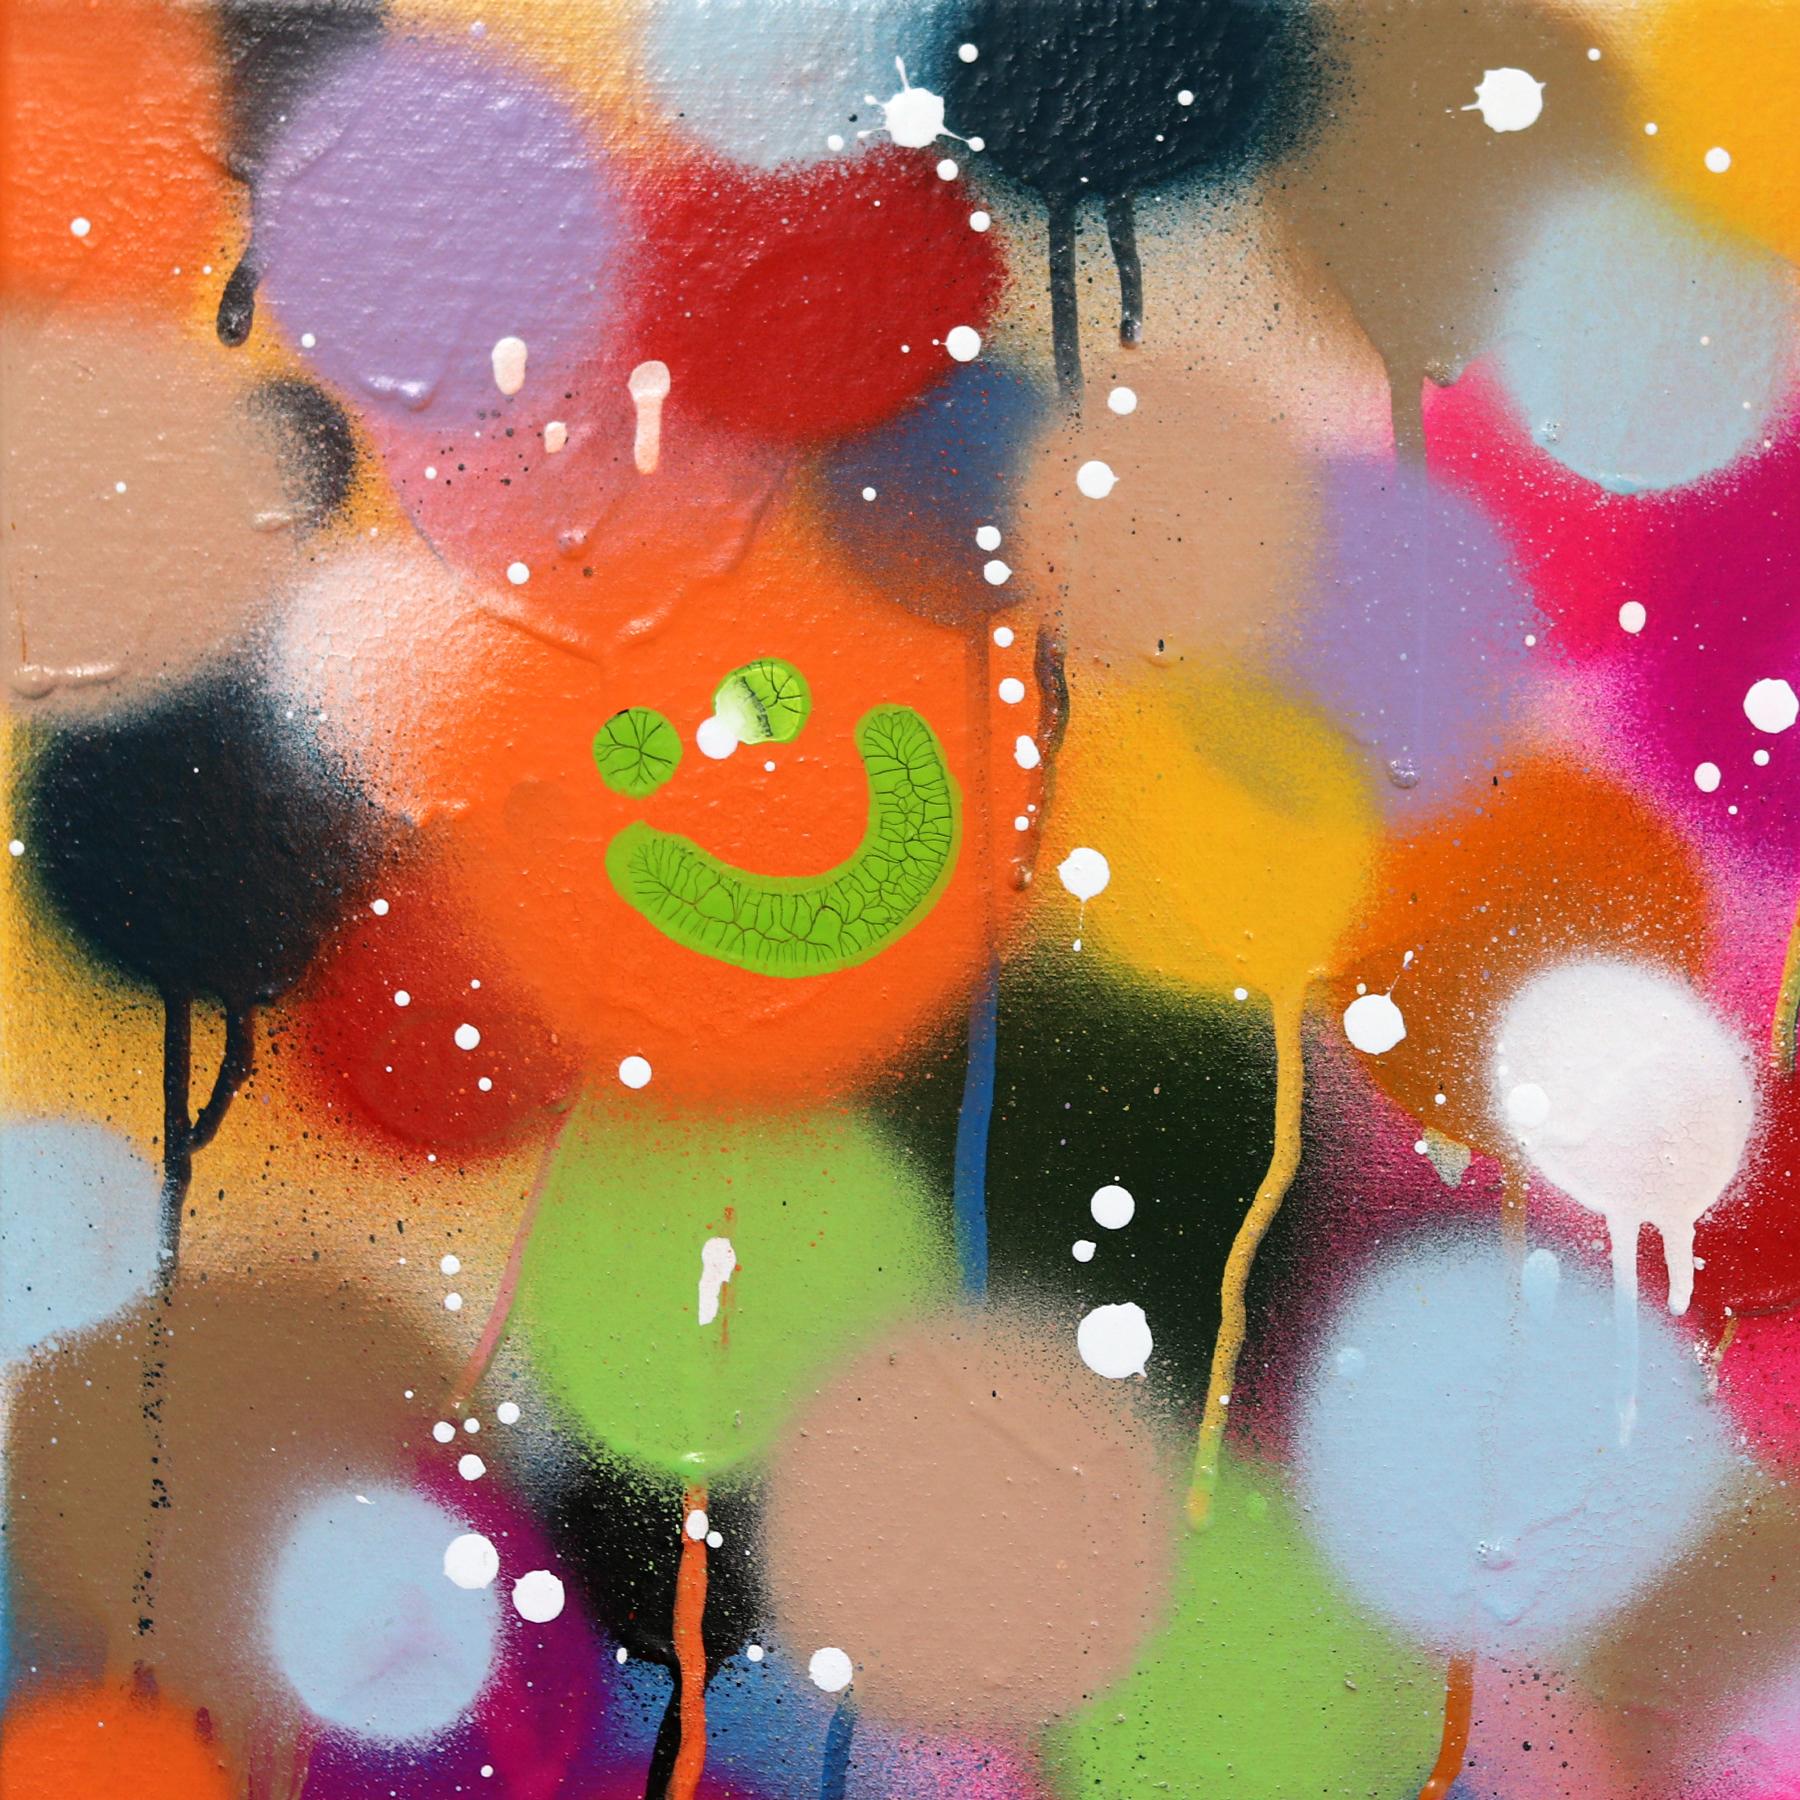 Smile, Be Happy - Colorful Original Love Graffiti Painting on Canvas For Sale 3